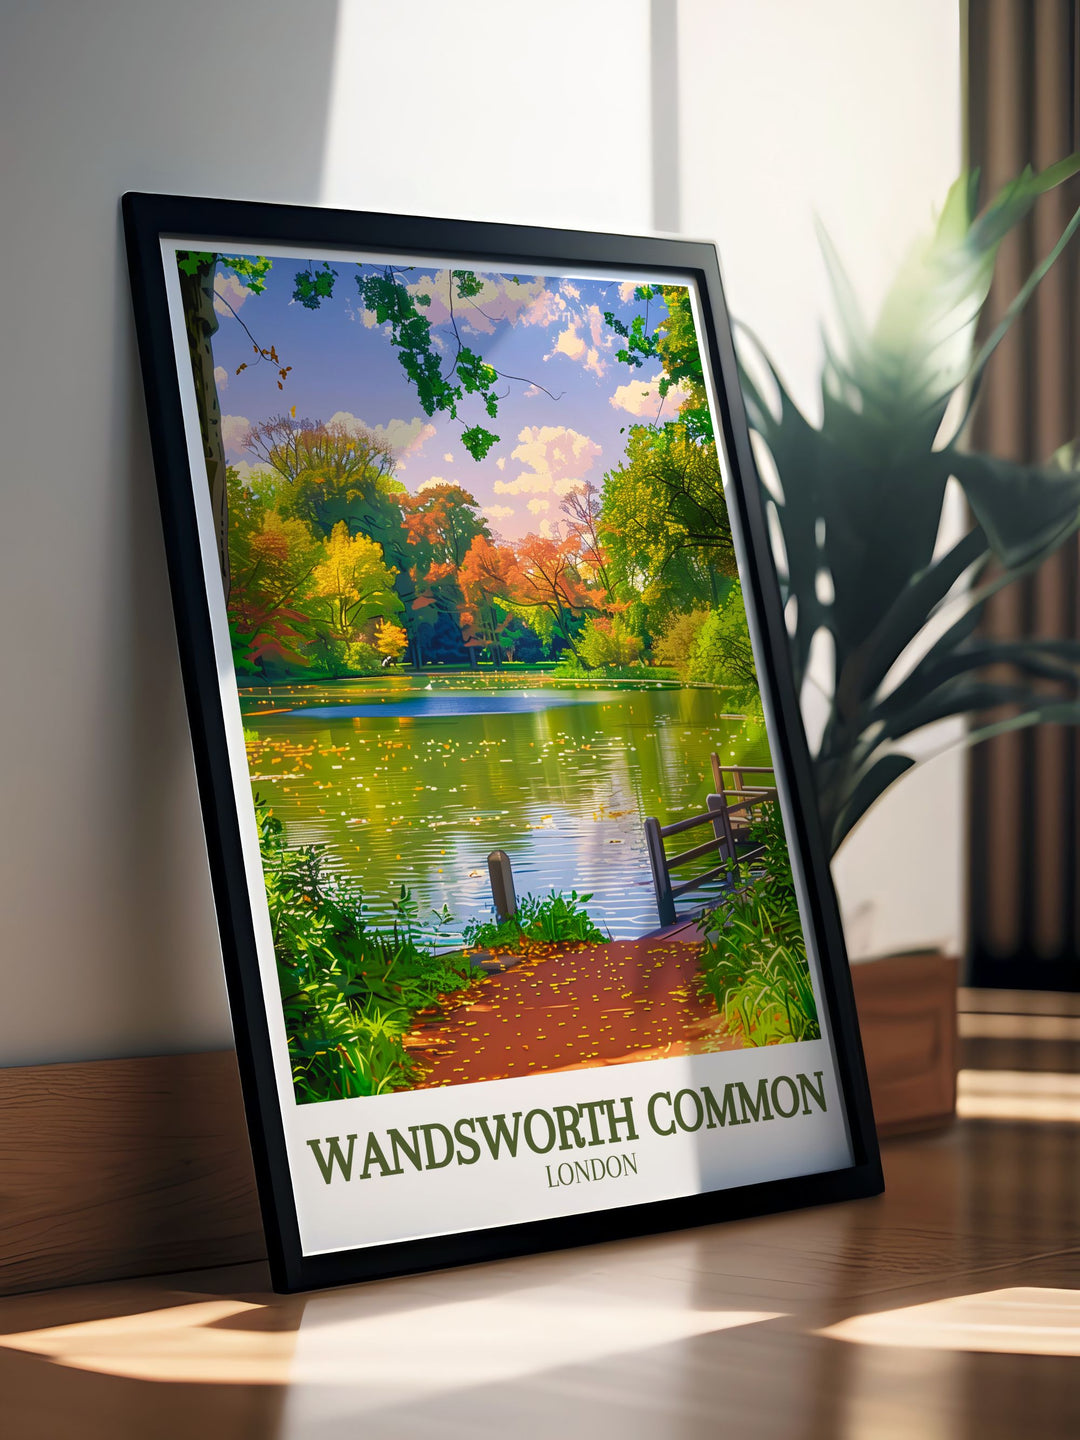 Elegant Wandsworth Common poster showcasing the beauty of Wandsworth Pond and the surrounding park. This vintage London print is ideal for adding a touch of nostalgia and charm to any room.